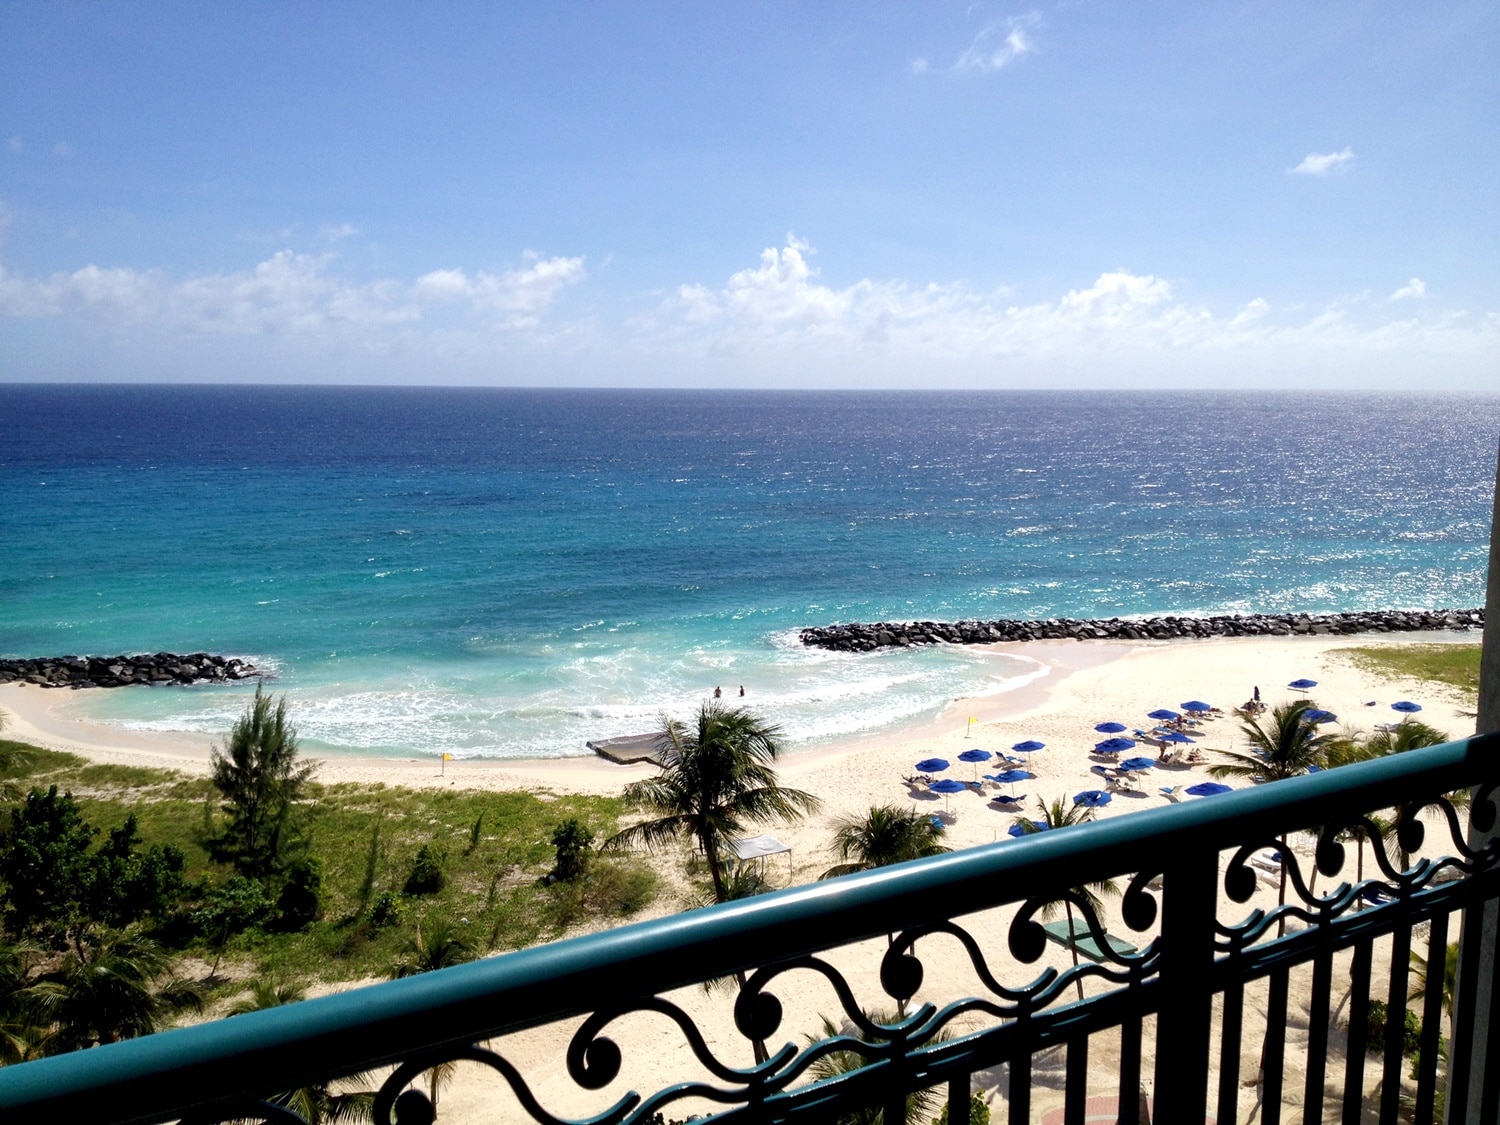 Caribbean islands are so beautiful! Each island has its own identity and many have beautiful beaches that range in colors from turquoise to dark #blue.

This is a photo we took from the balcony of our hotel room (Hilton https://tinyurl.com/Barbados-Hilton ) at Needham's Point in Barbados. It is a popular beach with both visitors and locals alike.

Needham's Point is located at the southern end of Carlisle Bay, which is on the south west tip of Barbados. To get to this beach from Bridgetown the capital, takes about 14 minutes. 

More photos and travel adventures. http://travelwith2ofus.com/

#aquatrove #Barbados #Caribbean